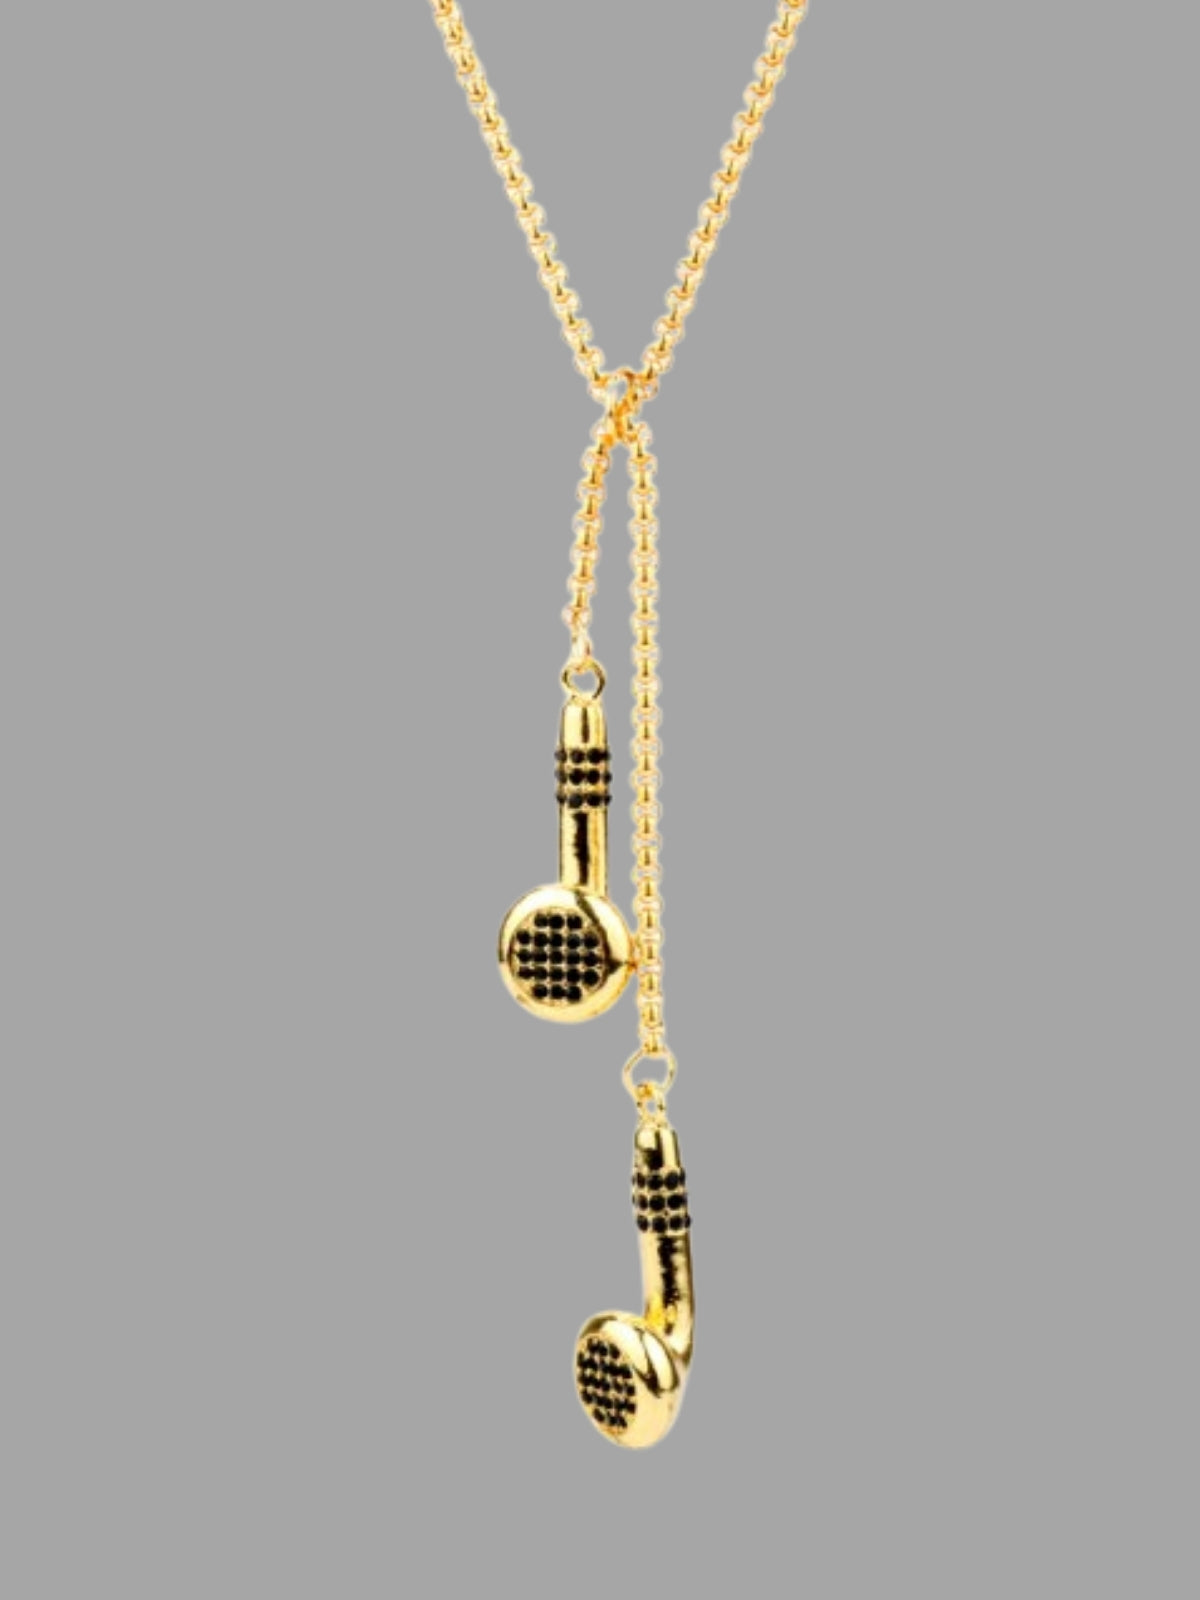 Girls Accessories | Headset Gold Chain Necklace - Mia Belle Girls